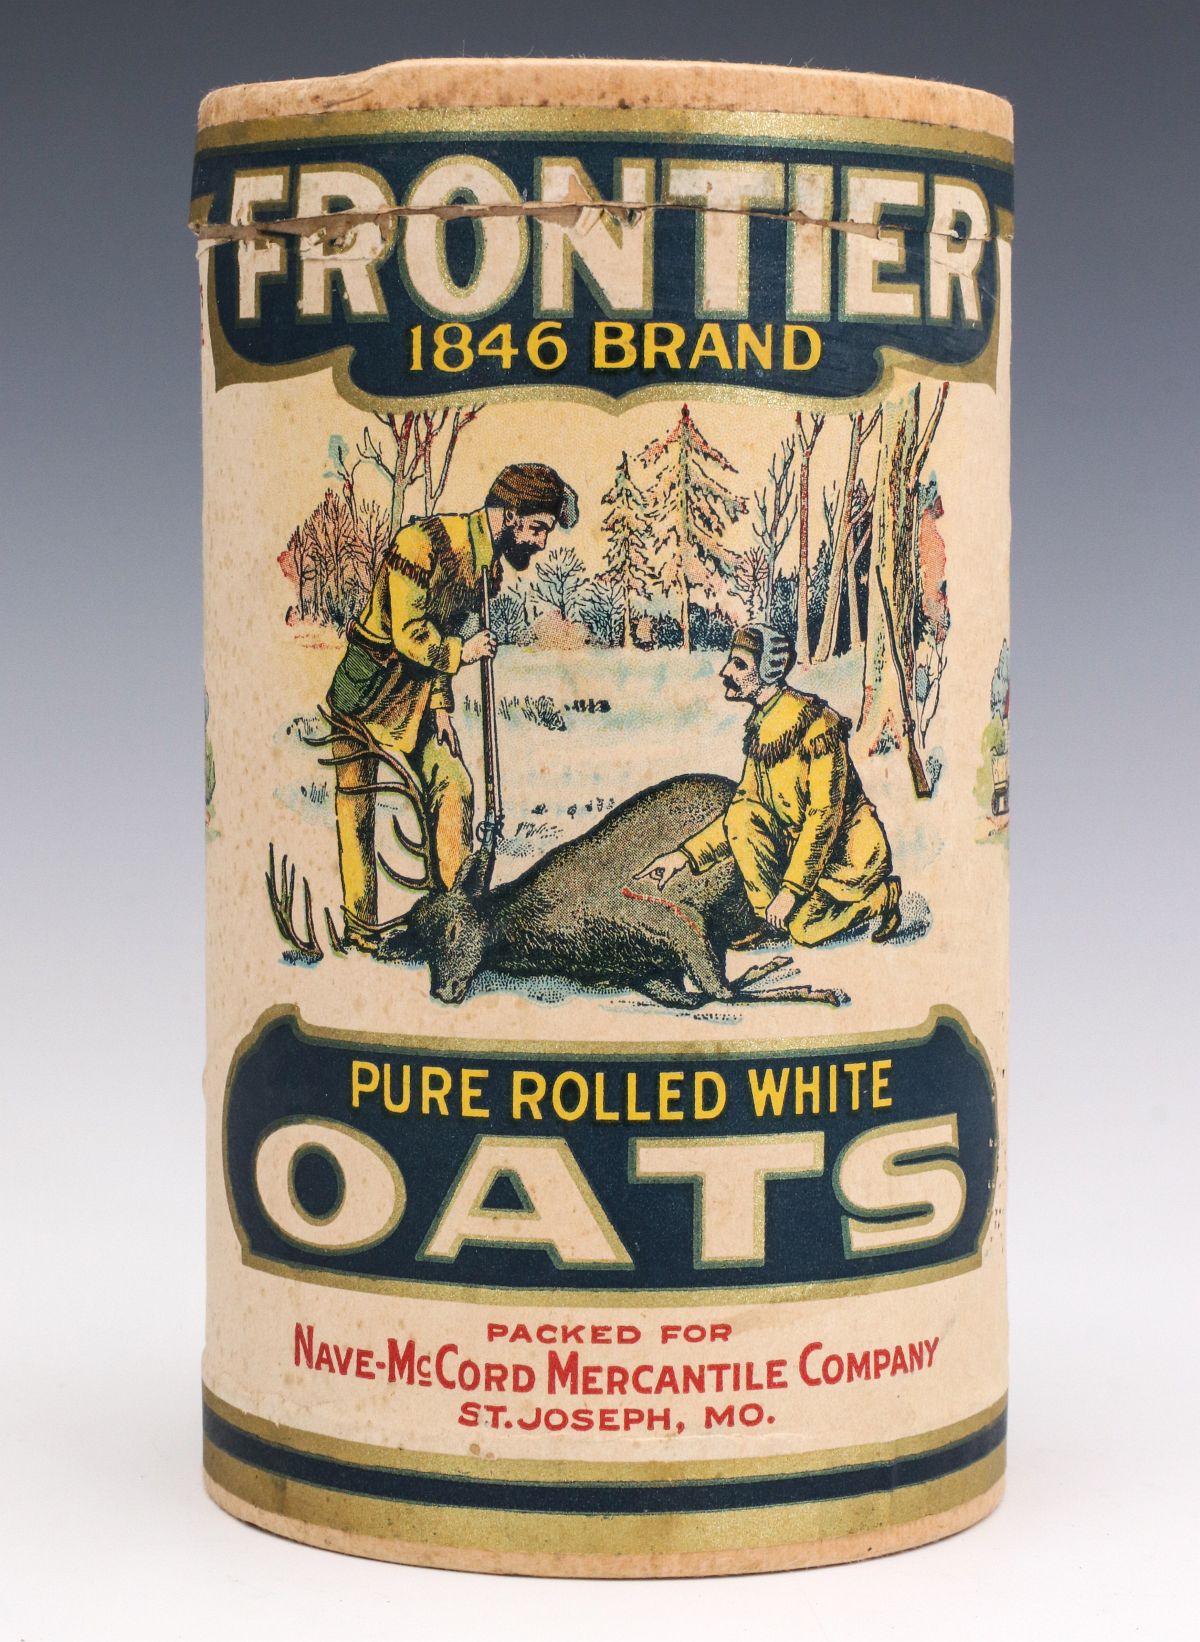 A FRONTIER 1846 BRAND ROLLED OATS CONTAINER C 1910